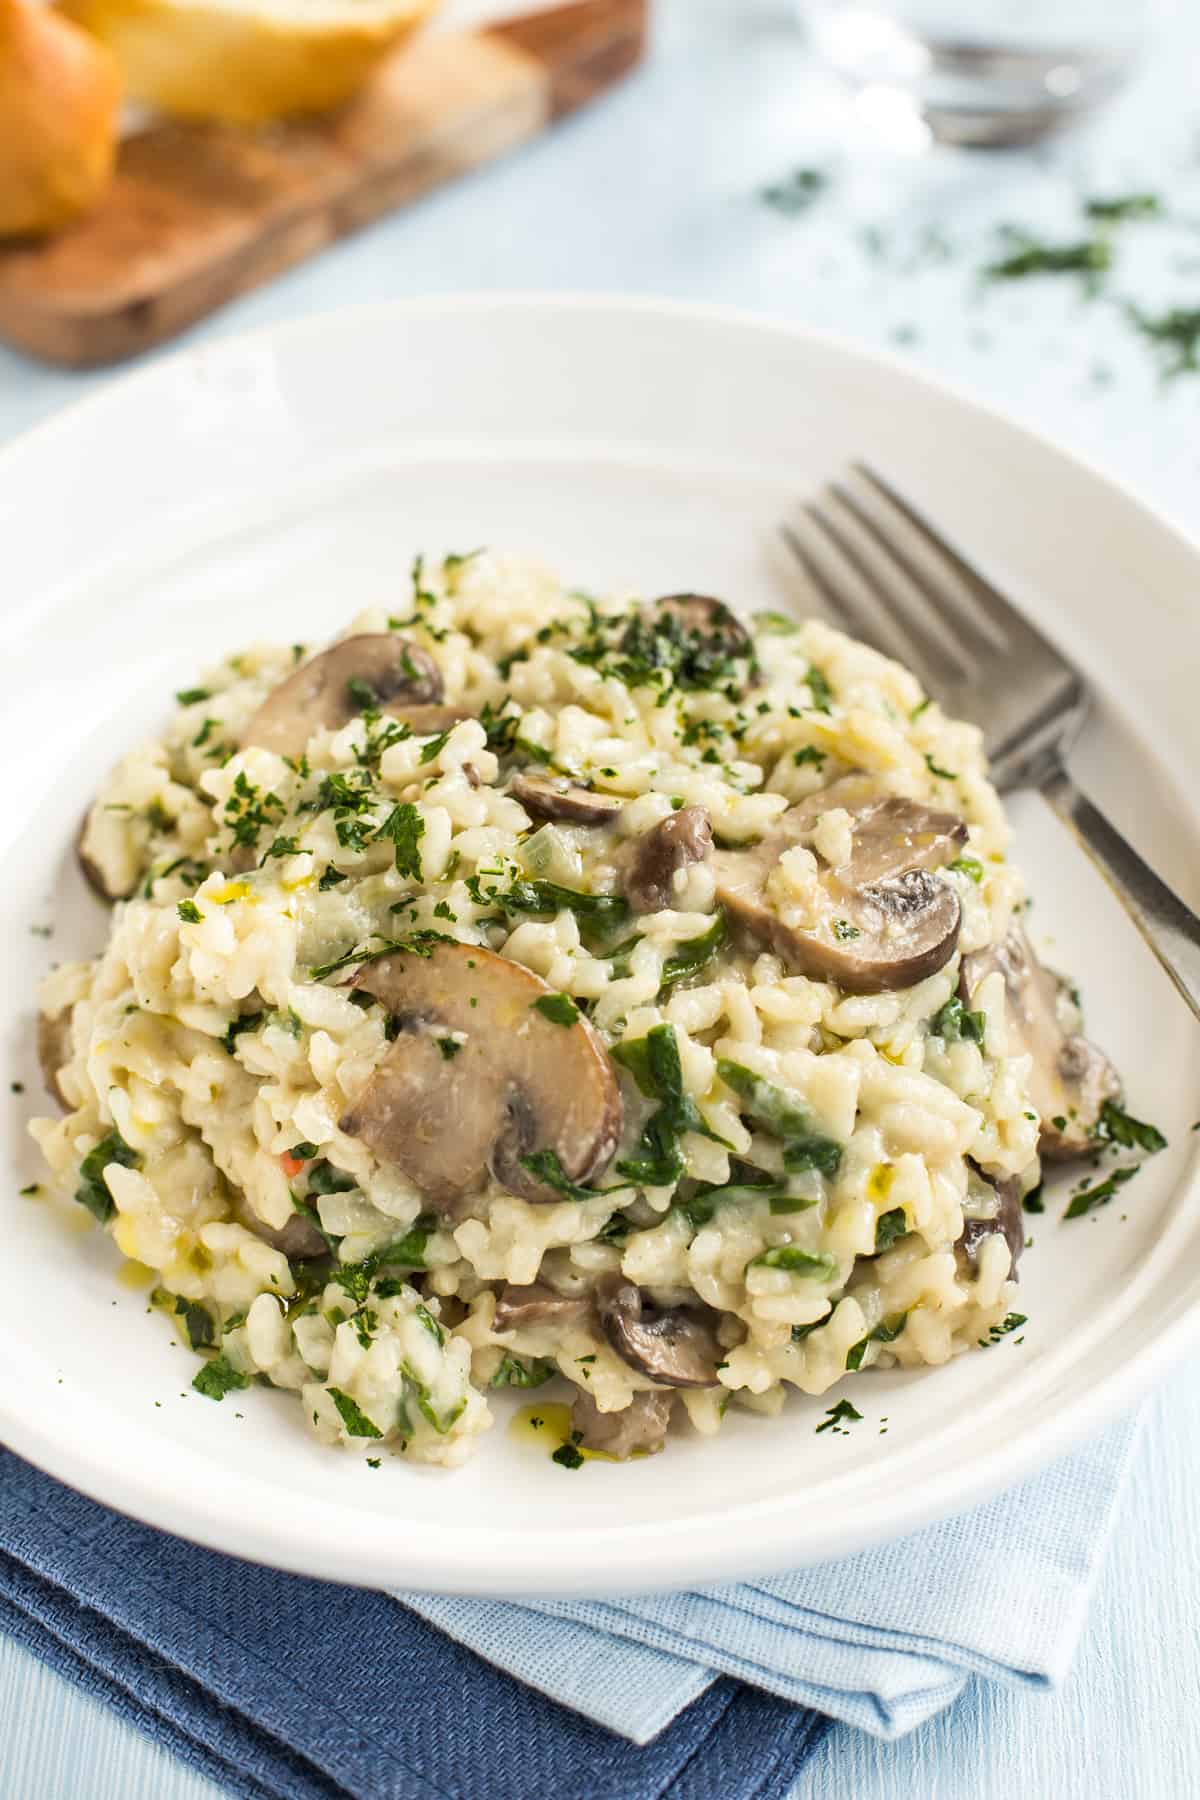 Portion of mushroom and spinach risotto in a bowl with a fork.